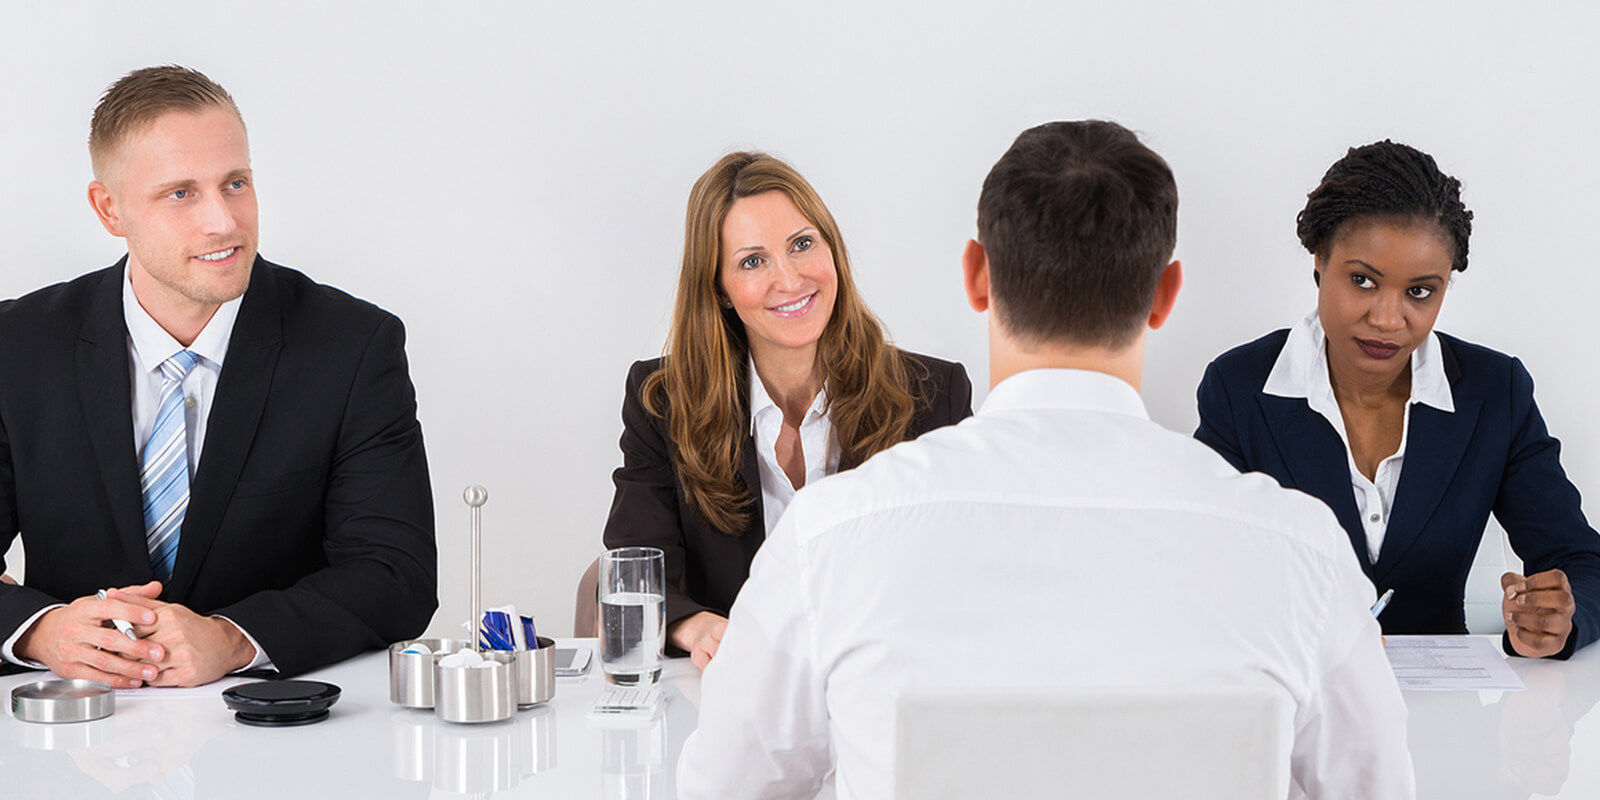 7 Ways to Prepare and Ace Your Job Interviews the Right Way